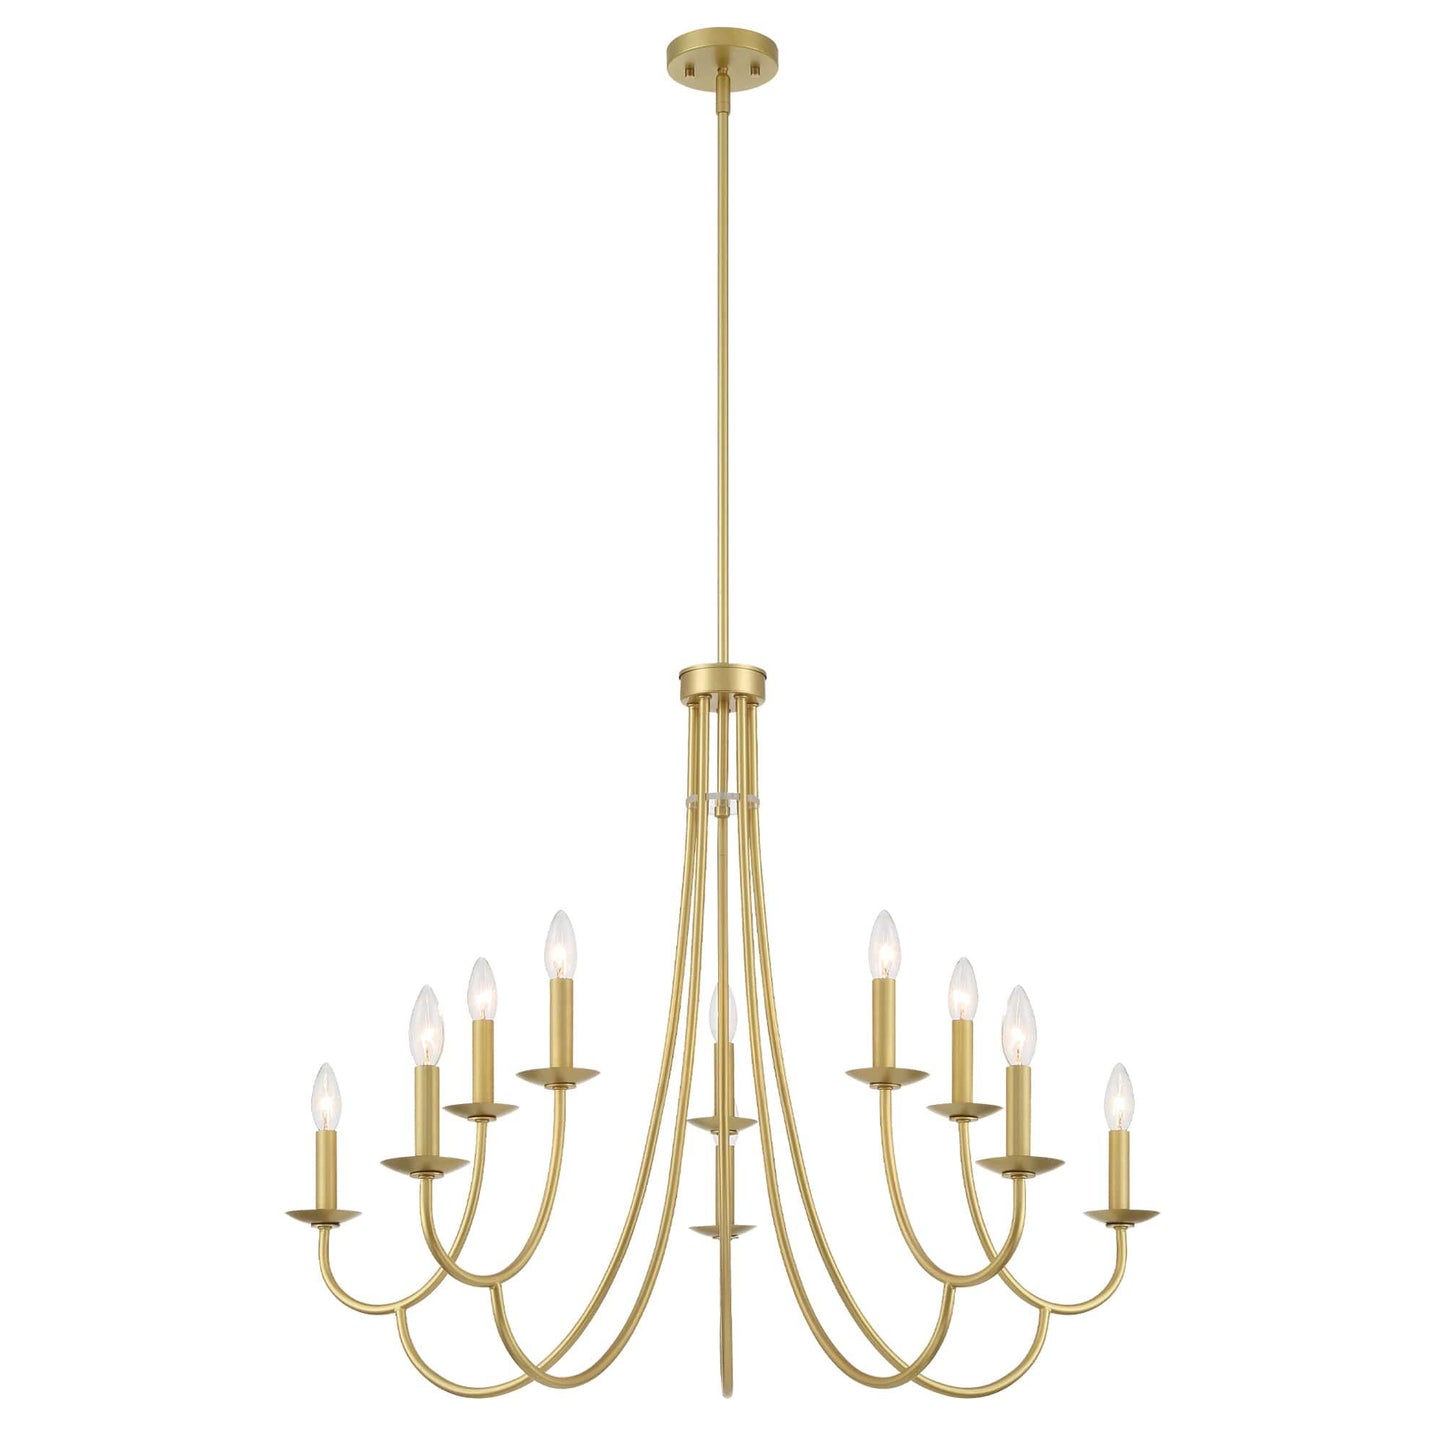 10 light candle style classic chandelier (2) by ACROMA